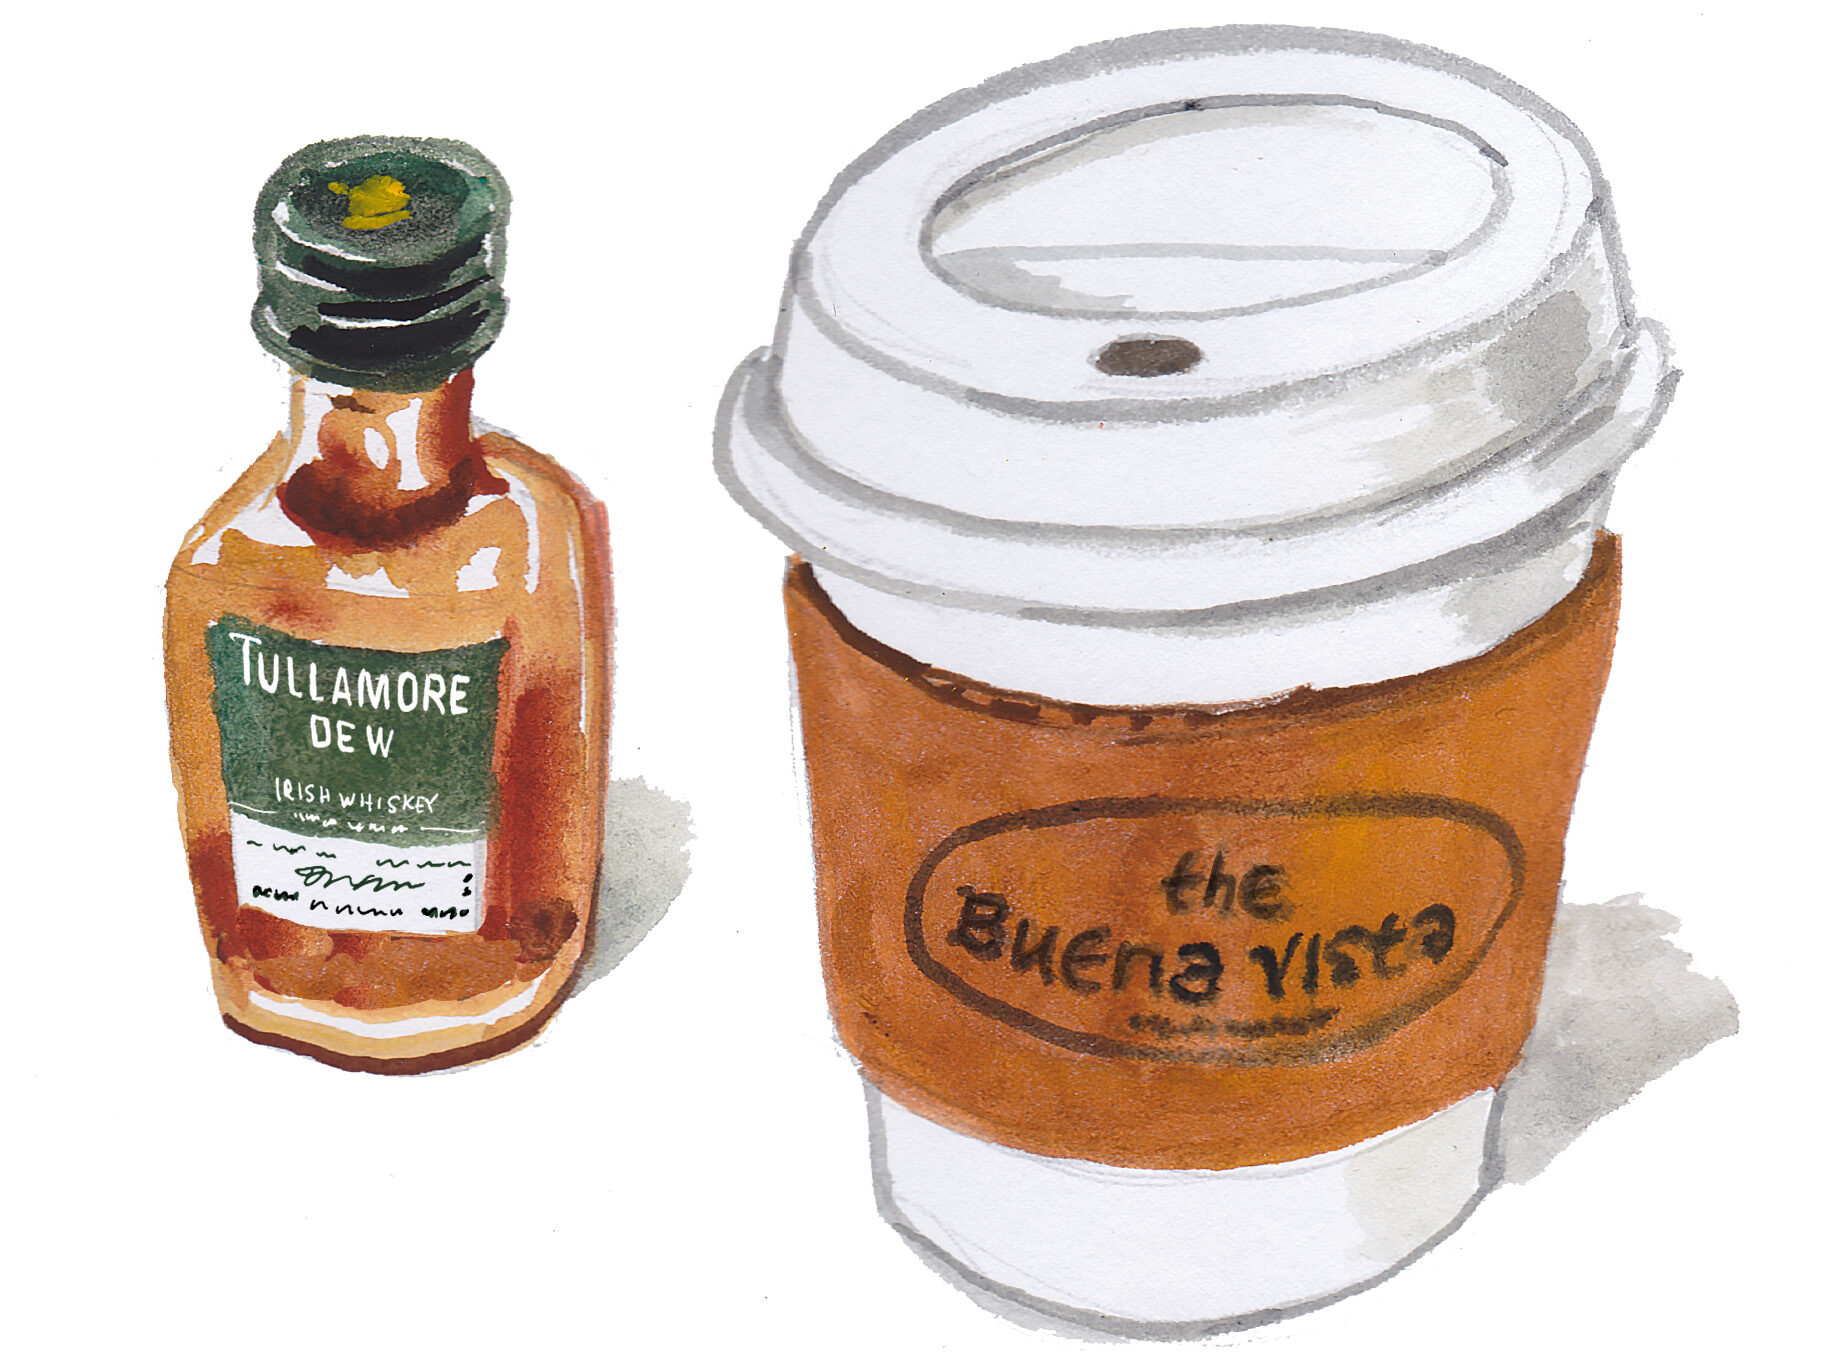 An illustration of a tiny liquor whiskey bottle next to a to-go cup of coffee